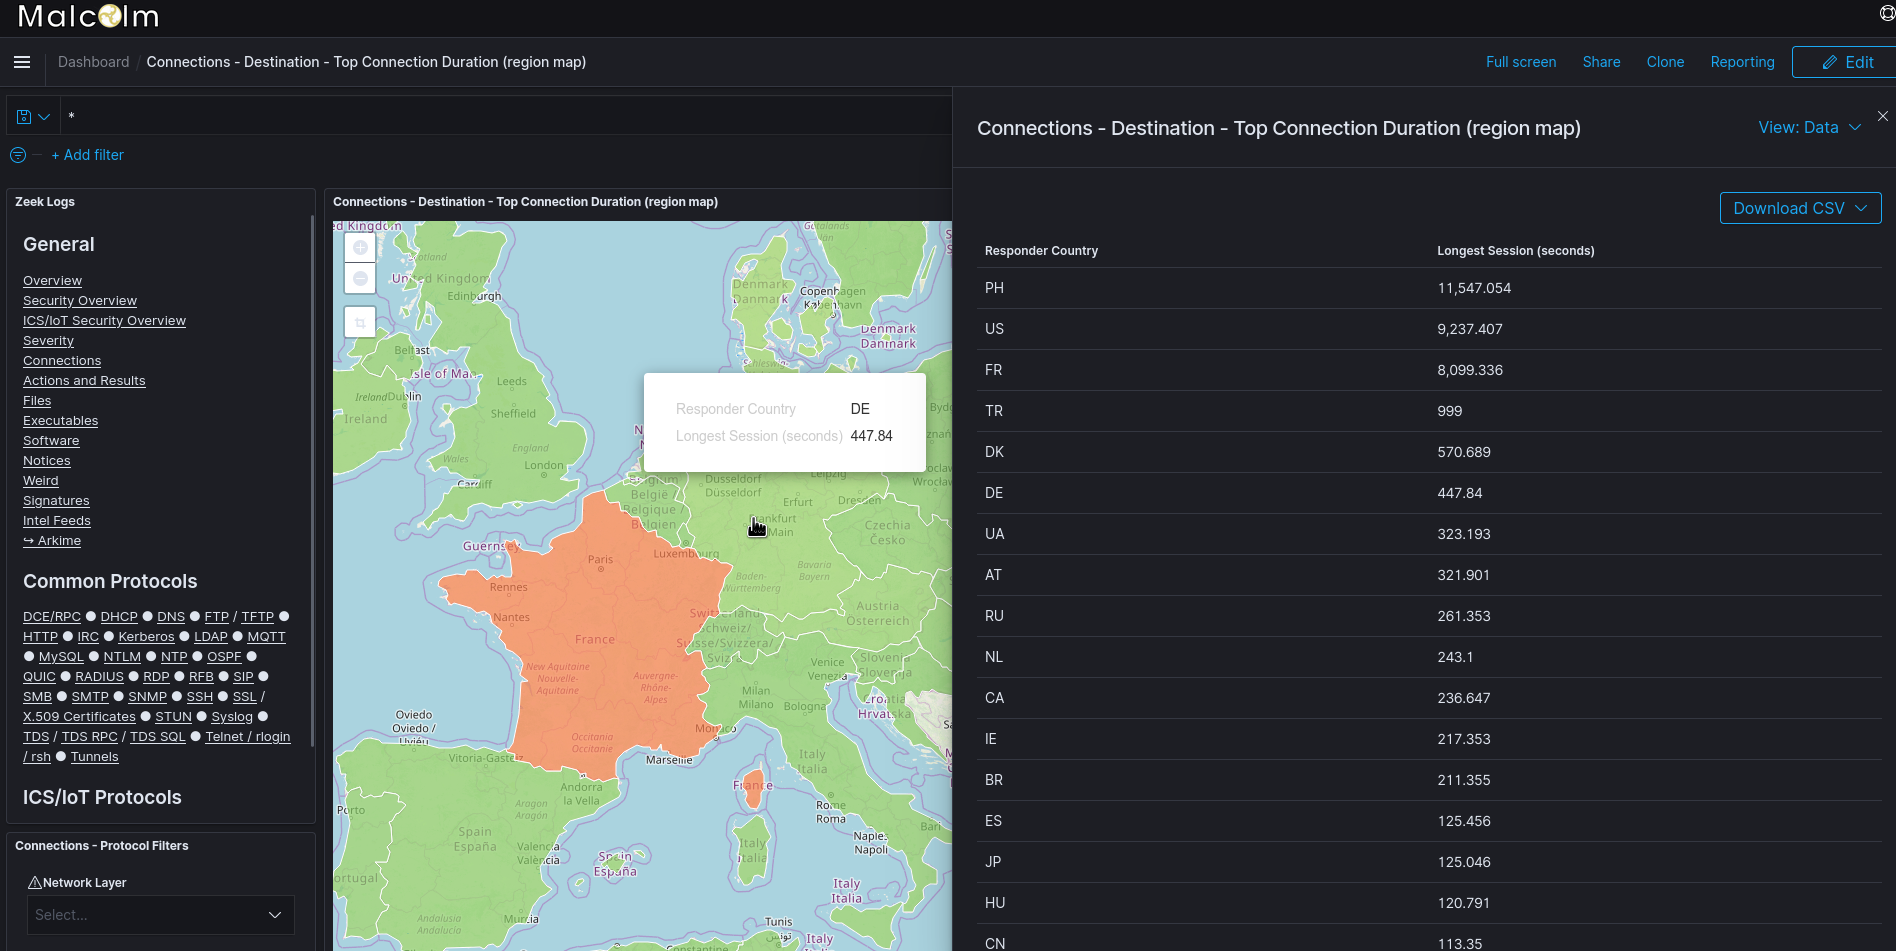 OpenSearch Dashboards includes both coordinate and region map types